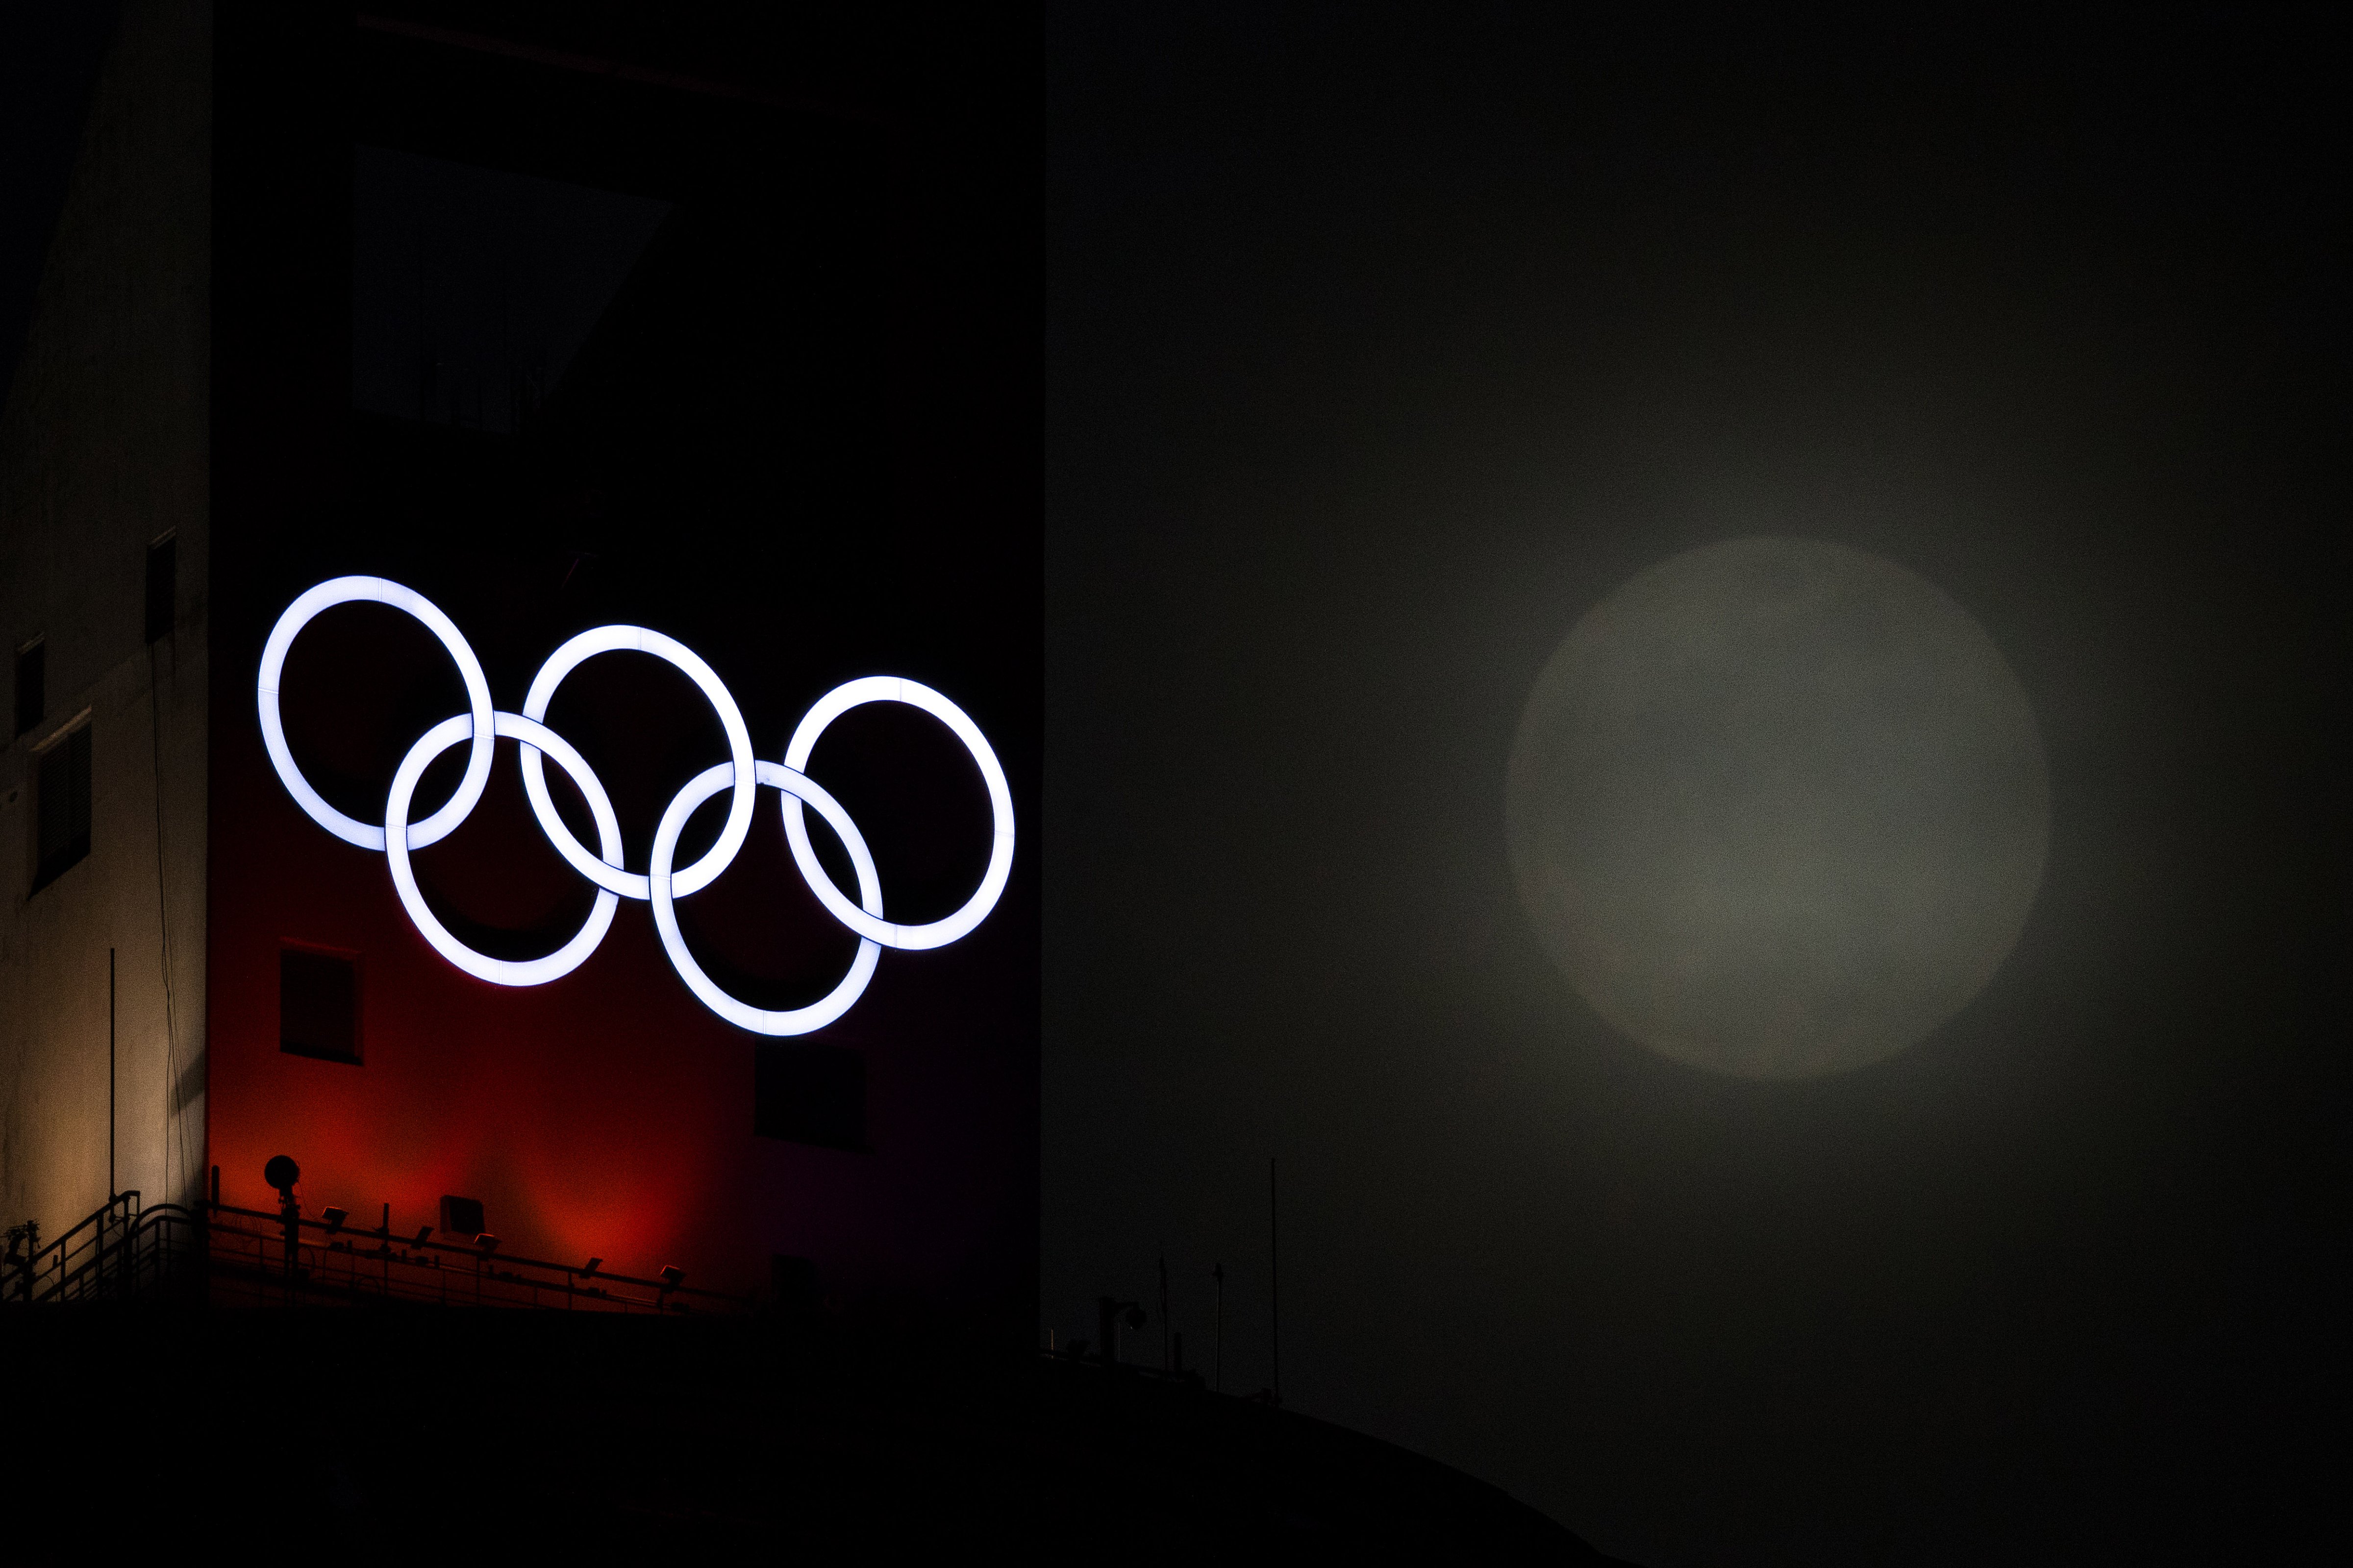 A Super Moon rises through the clouds past the Olympic Rings ahead of the Pyeongchang 2018 Winter Olympics on January 31, 2018 in Pyeongchang-gun, South Korea. (Richard Heathcote—Getty Images)